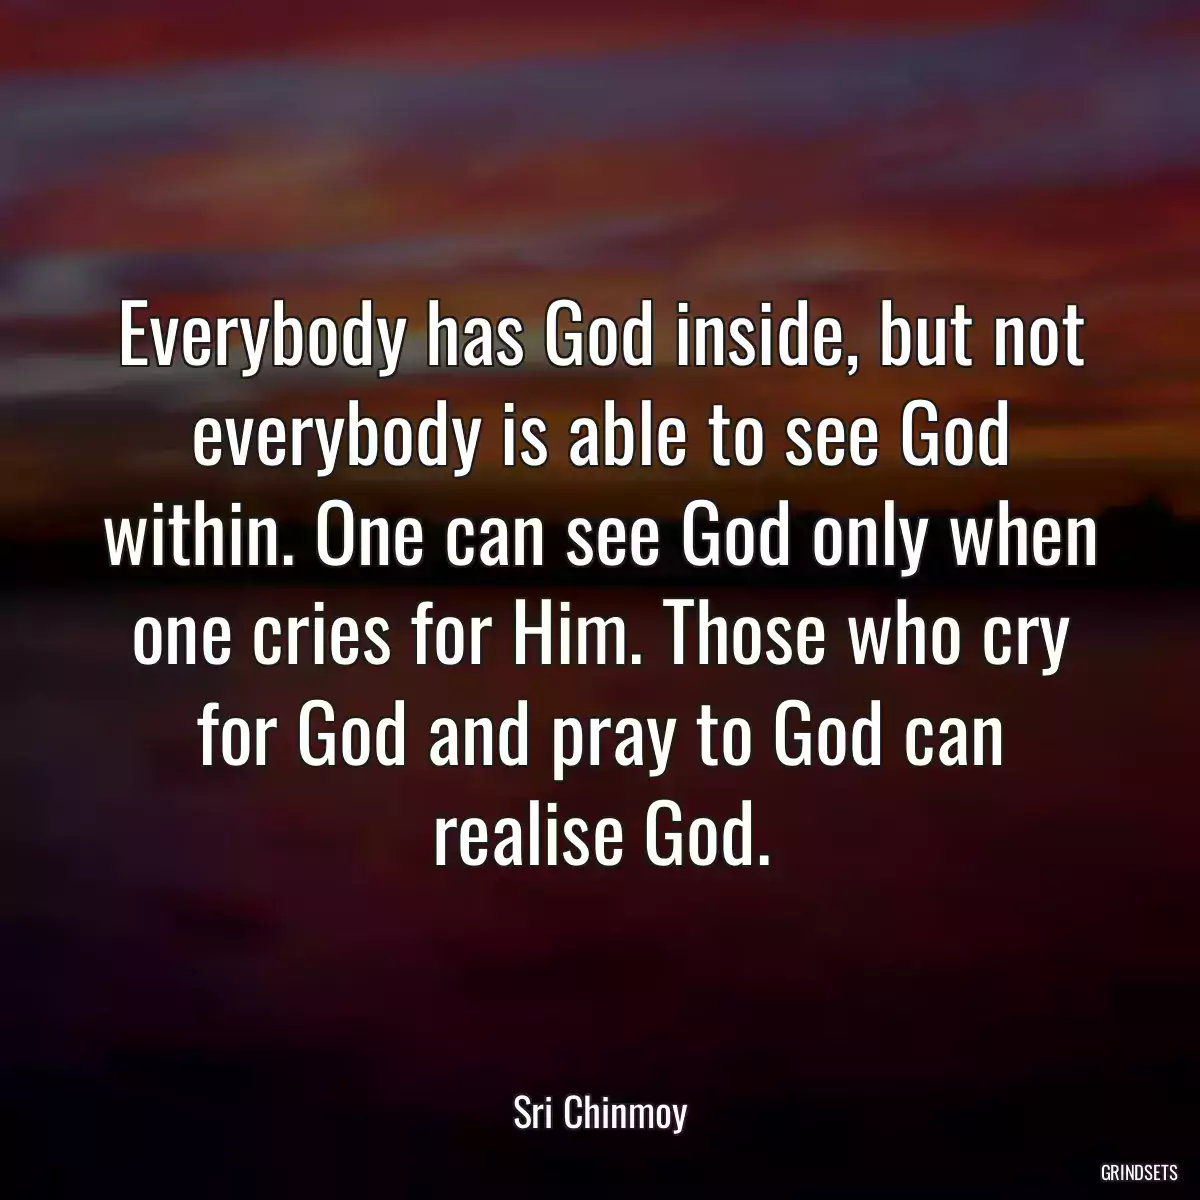 Everybody has God inside, but not everybody is able to see God within. One can see God only when one cries for Him. Those who cry for God and pray to God can realise God.